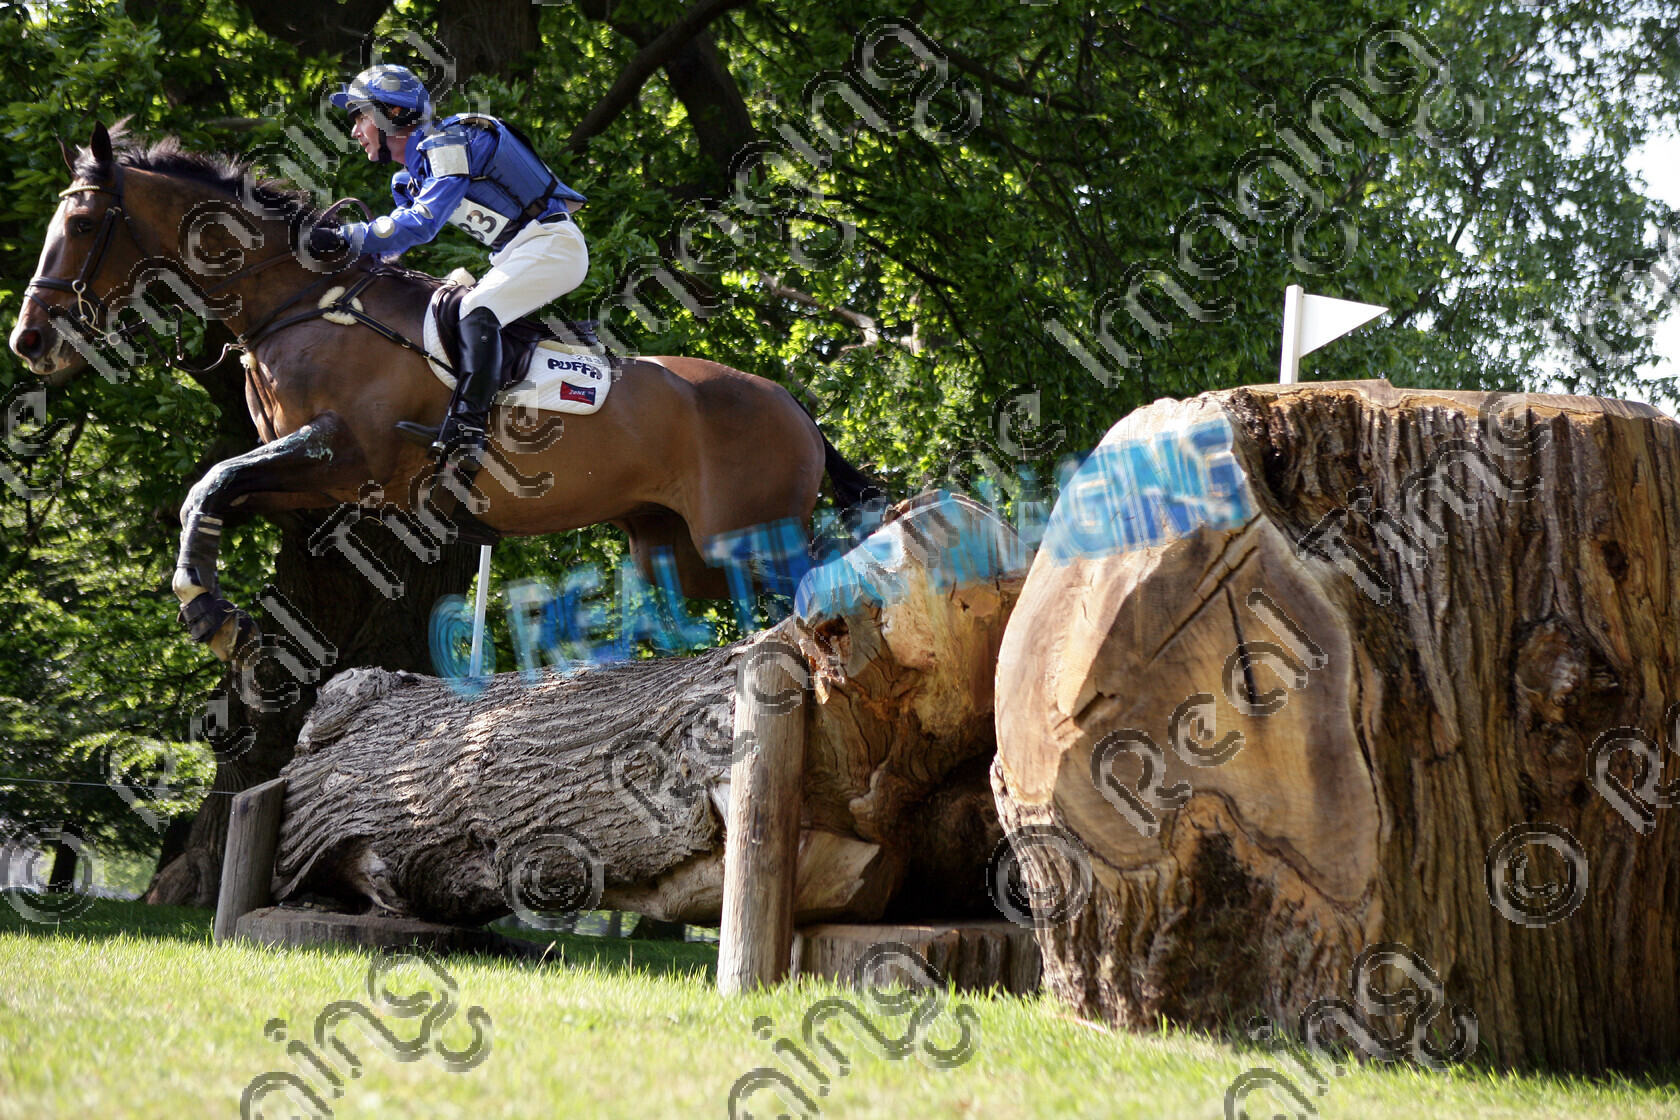 L01-01-01-260 
 283 
 Keywords: Houghton International 3 Day Event, Norfolk, UK, Saturday, 24 May, 2008, view landscape, Subaru, CCI** two star, cross country, 283, ALWAYS OWEN, `Owner: , Hack, Ms Elaine, `Rider: , Terry Boon, Bay, Gelding, log, fence, jump, horse equestrian equine sport